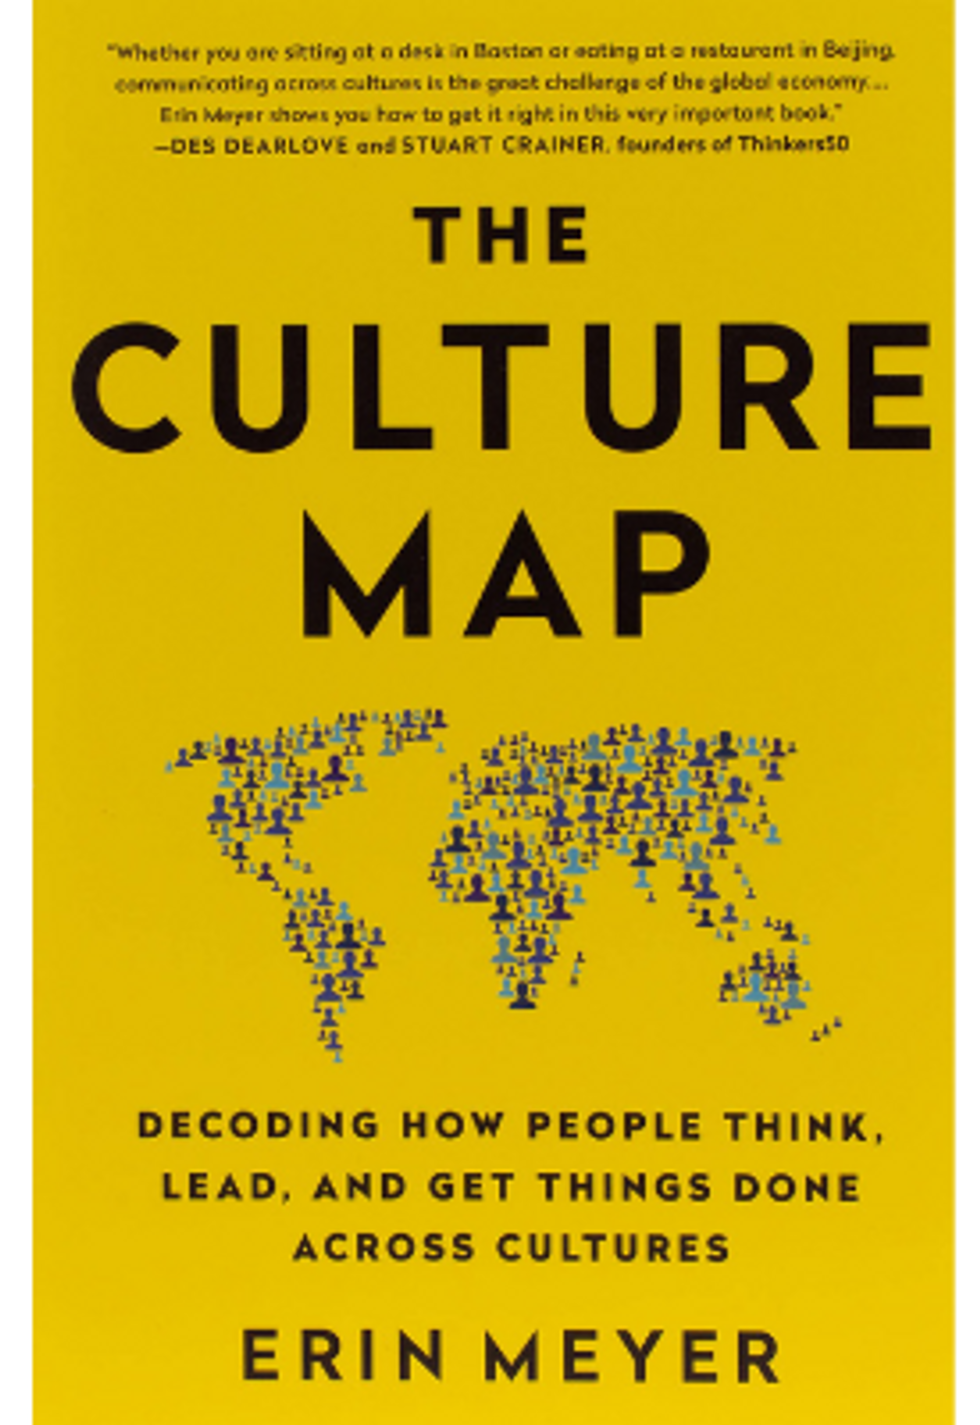 The front cover of the book "The Culture Map: Breaking Through the Invisible Boundaries of Global Business" by Erin Meyer